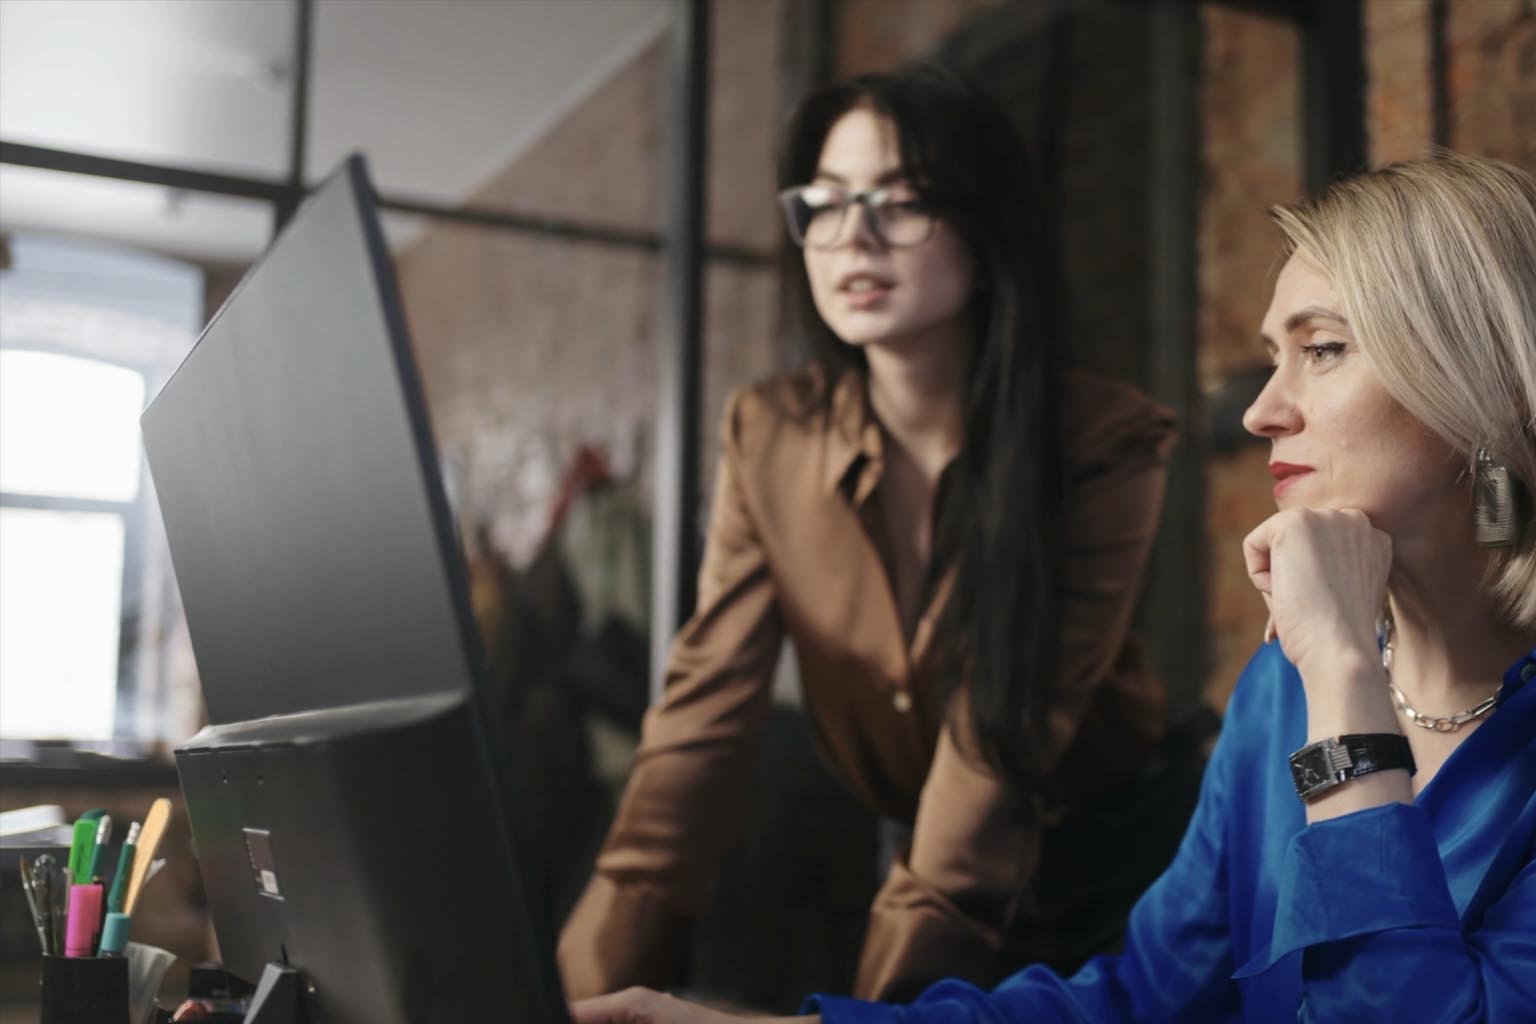 Two women, one seated and one standing, looking at a computer in a professional business setting